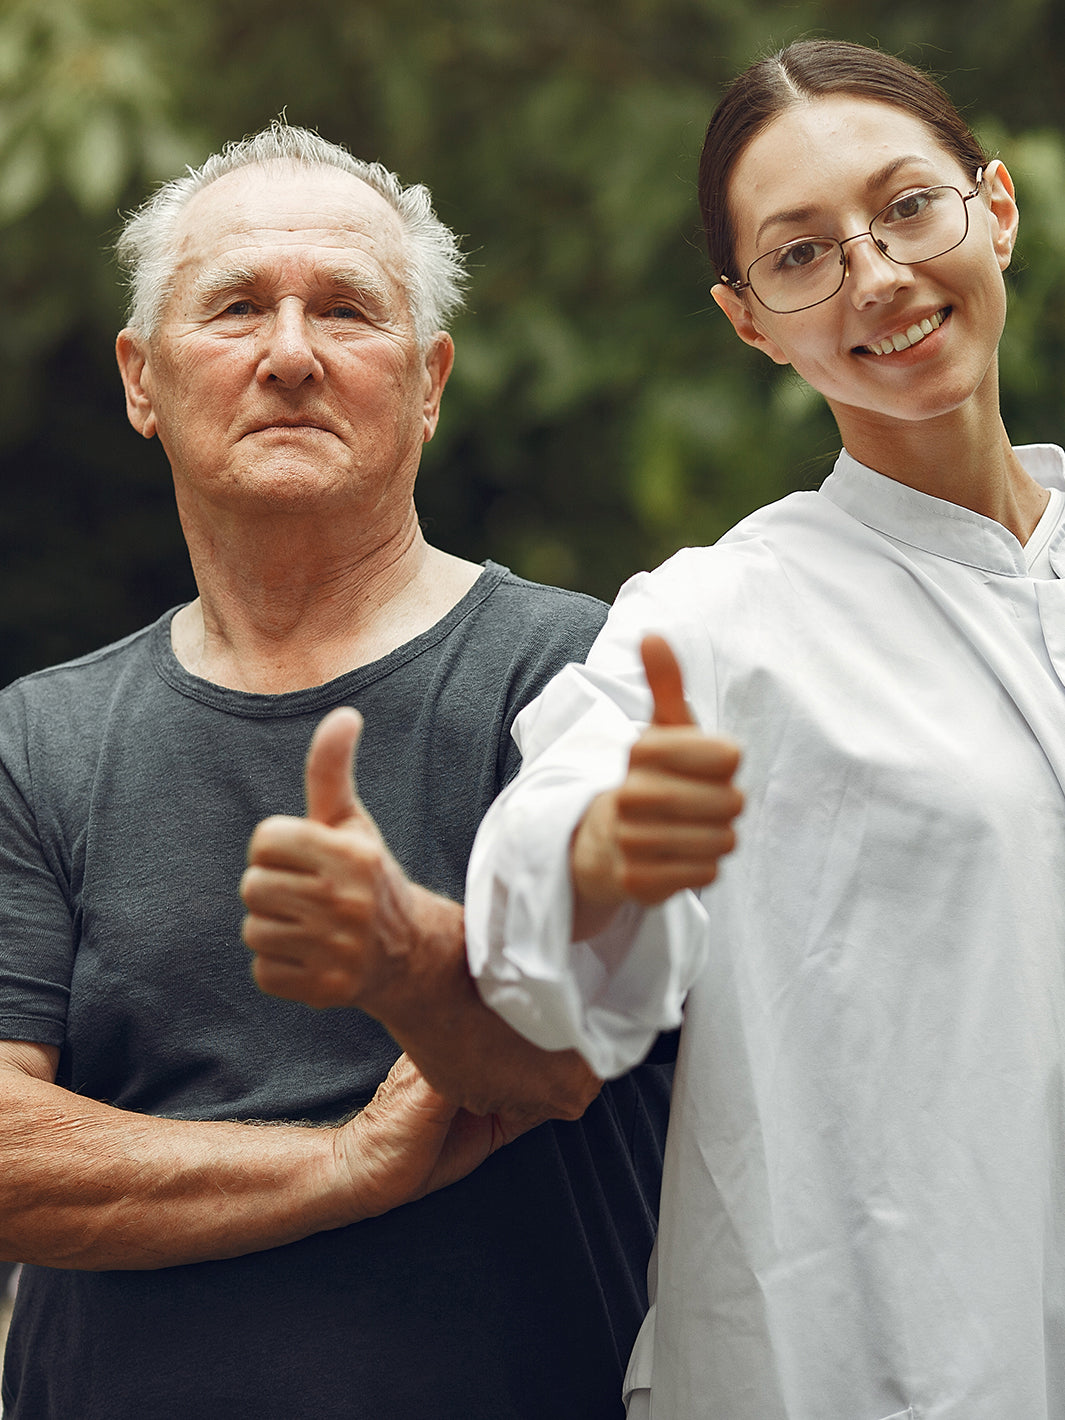 Older man with healthcare professional holding thumbs up indicating that it's all good